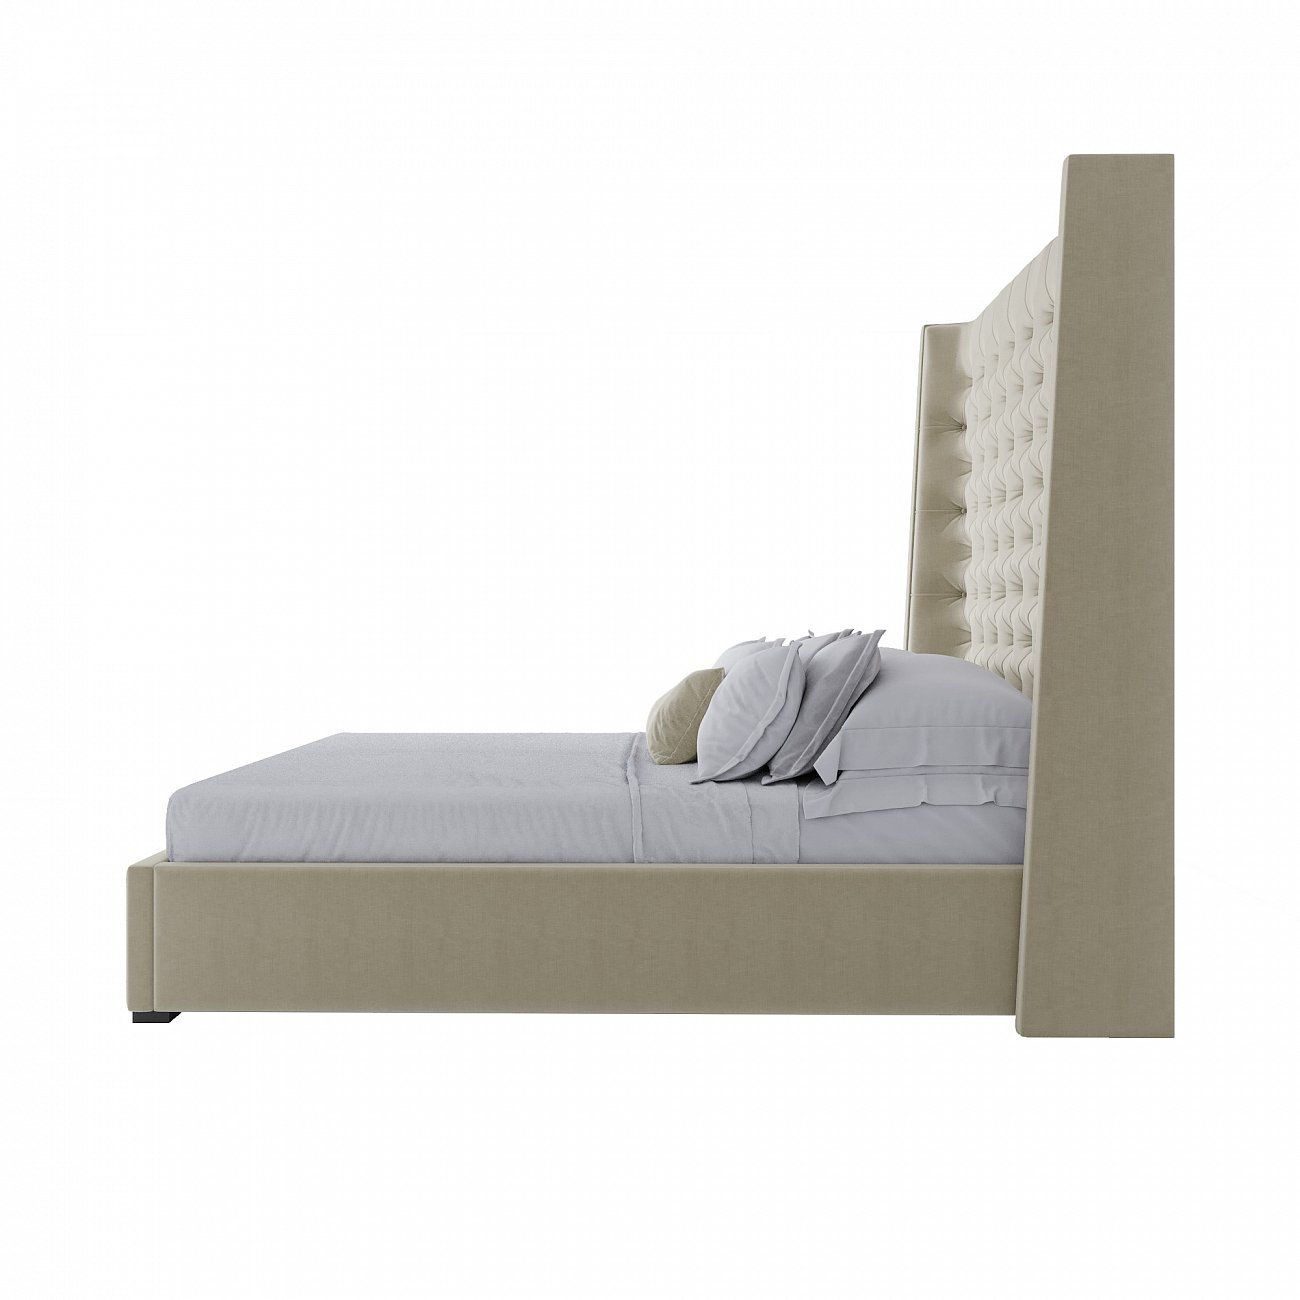 Double bed with upholstered headboard 160x200 cm beige Jackie King